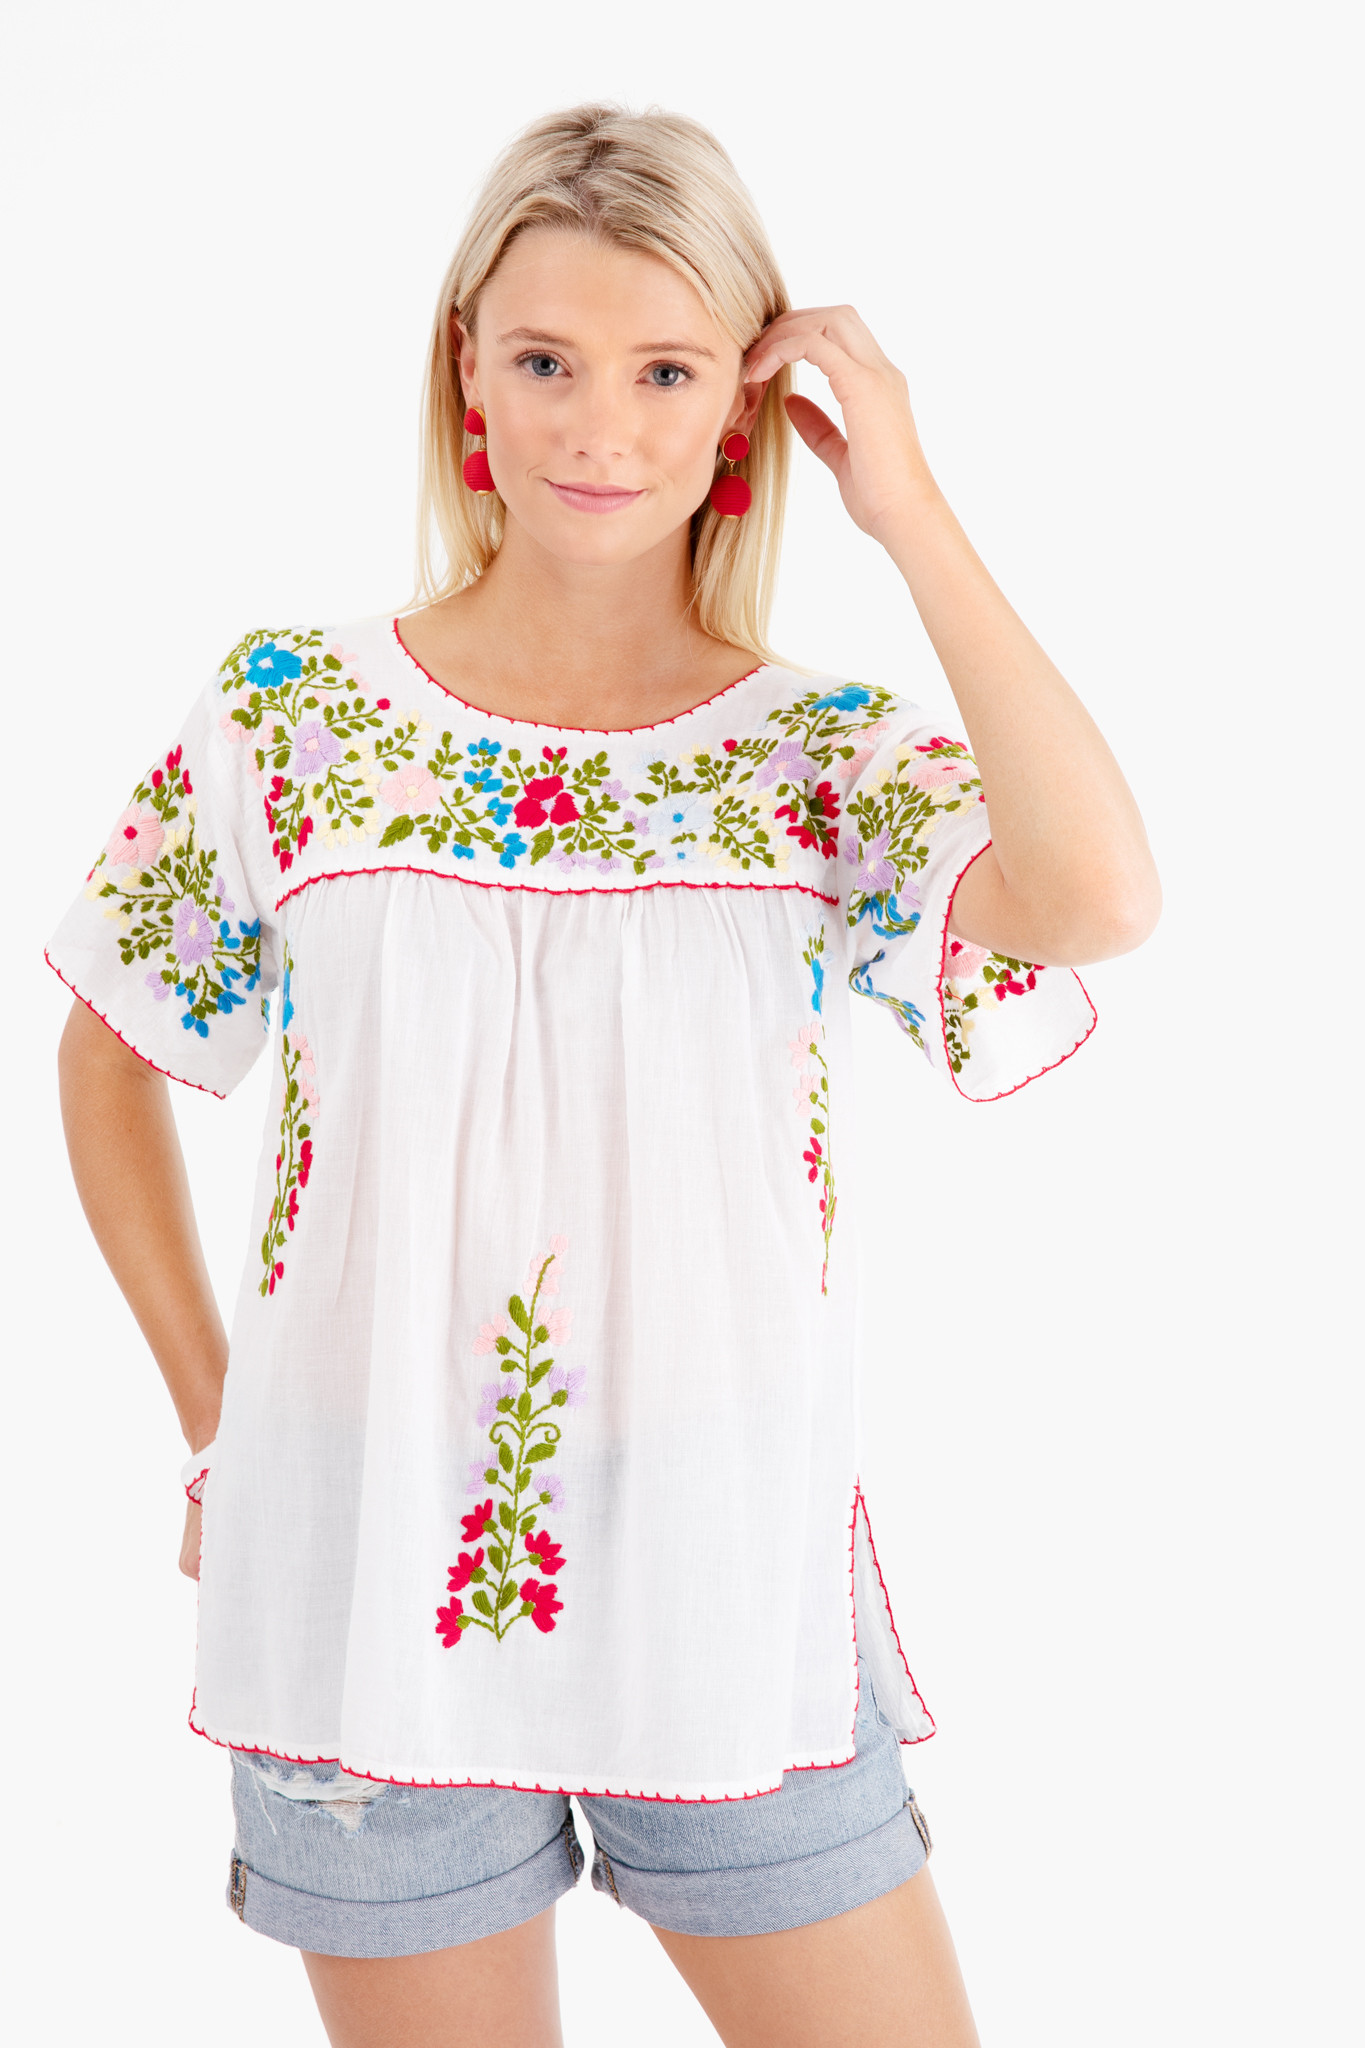 Mexican Floral Embroidered Top White Red Blue Green Women's